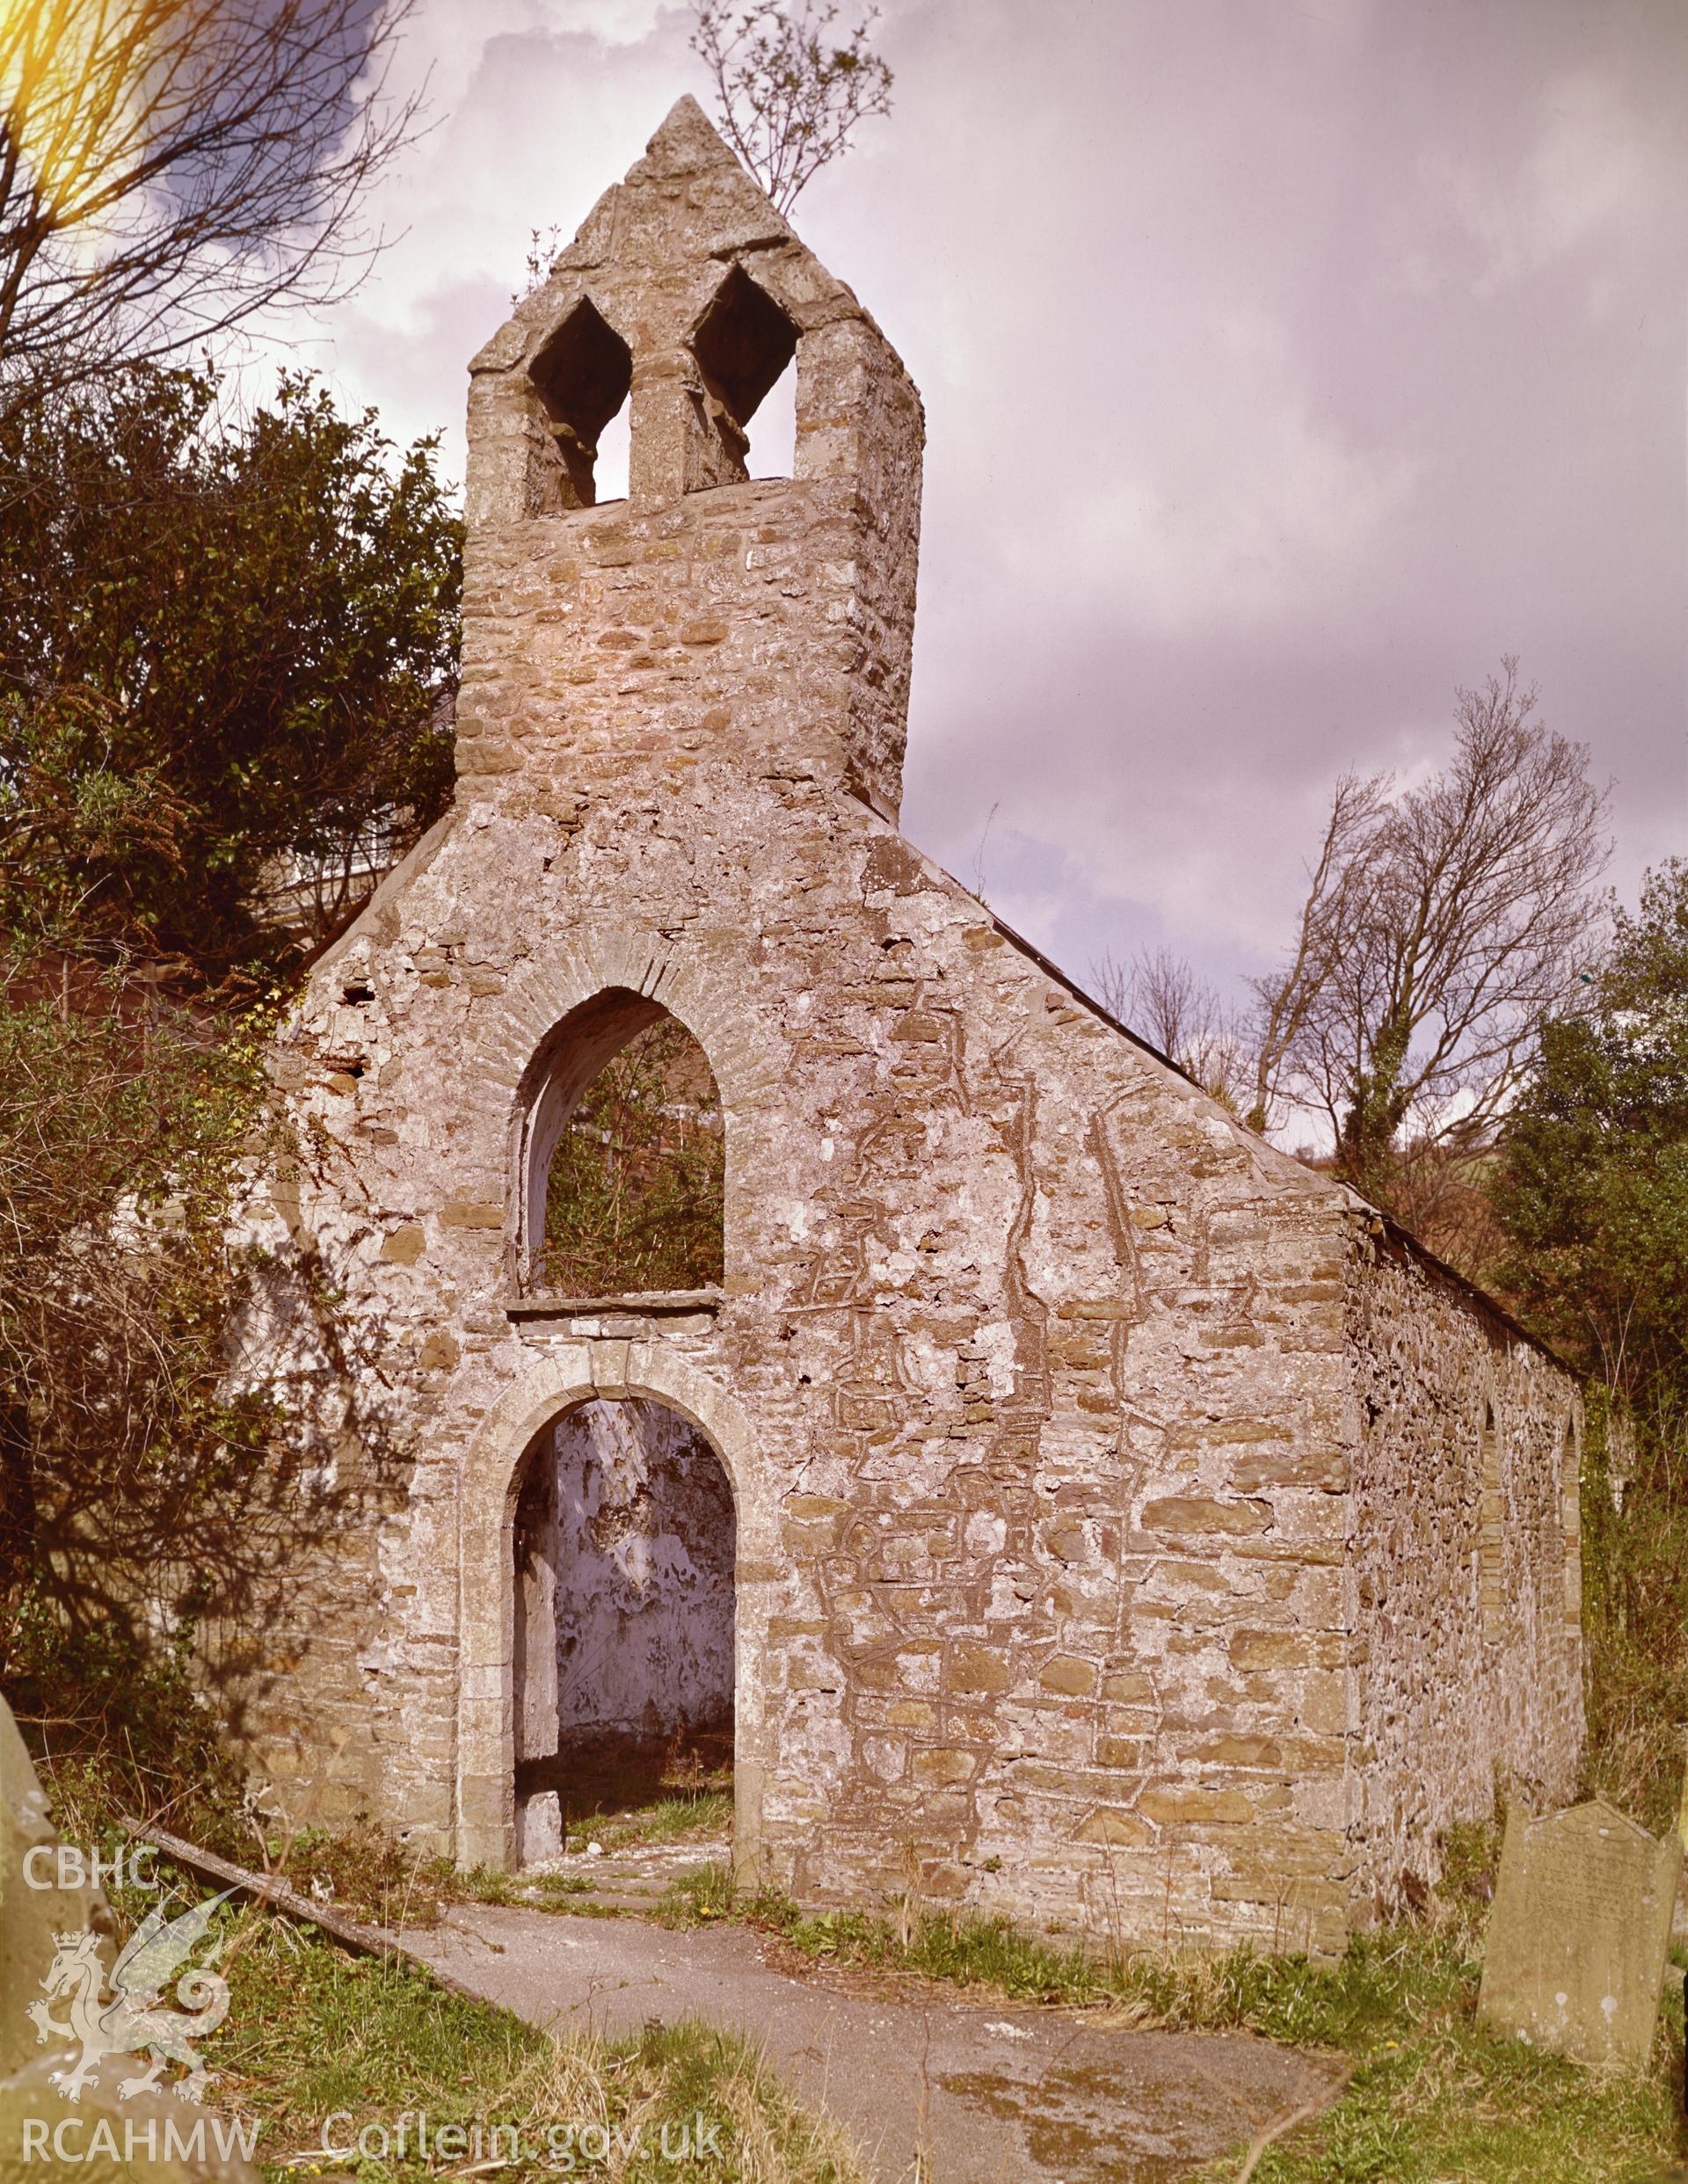 RCAHMW colour transparency showing the ruins of St Baglan's Church, Baglan, taken by RCAHMW, undated.